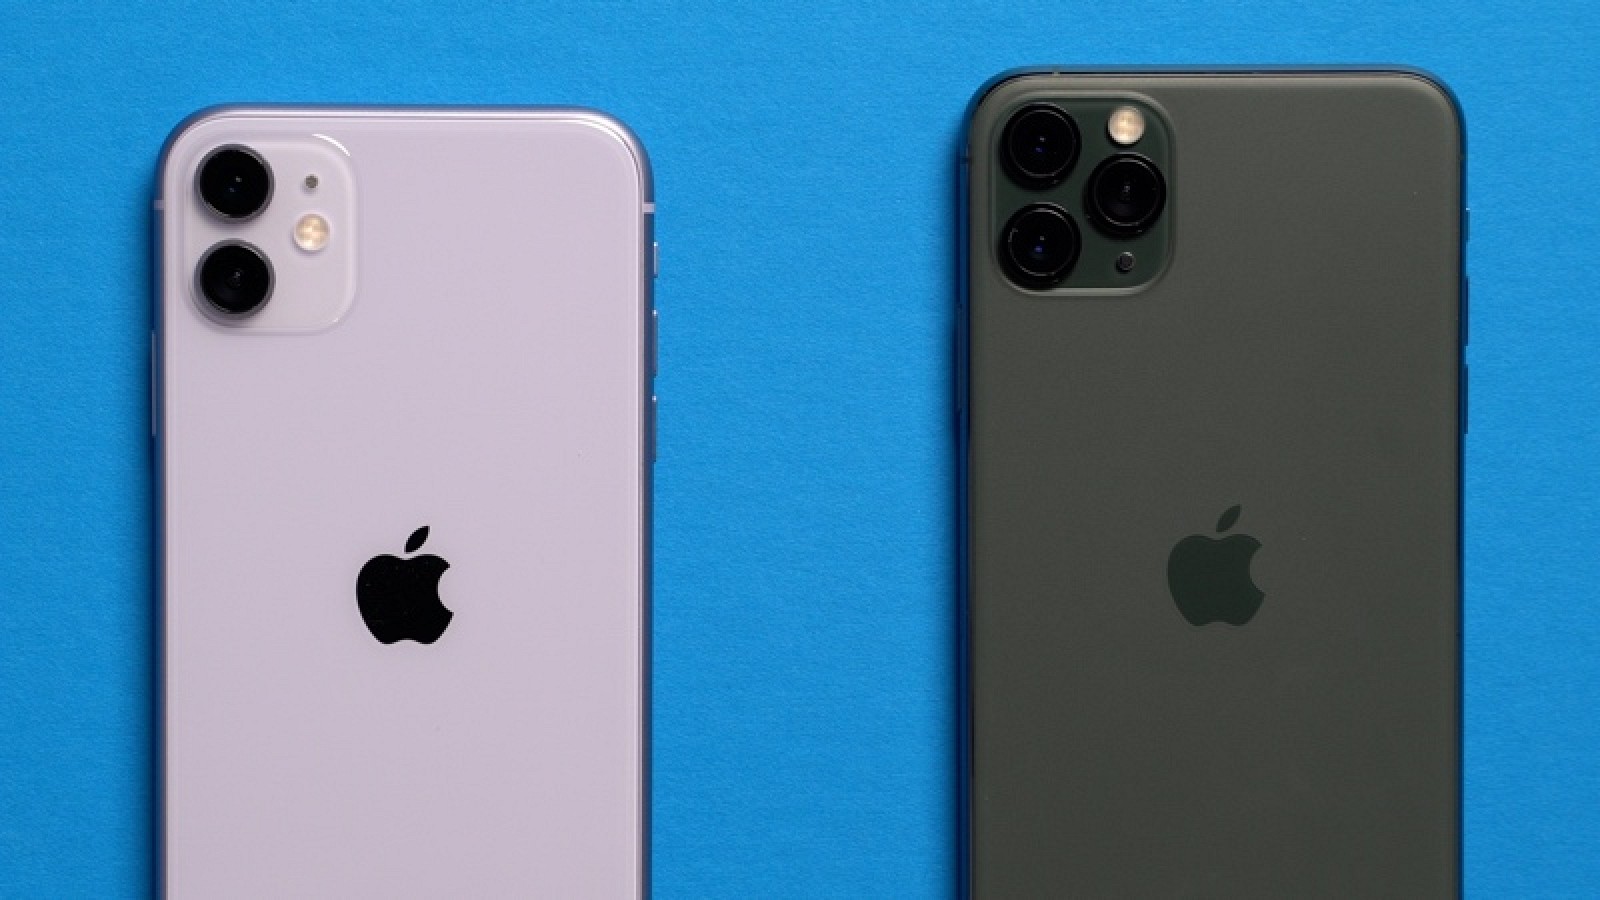 HandsOn With The New IPhone 11 And IPhone 11 Pro Max